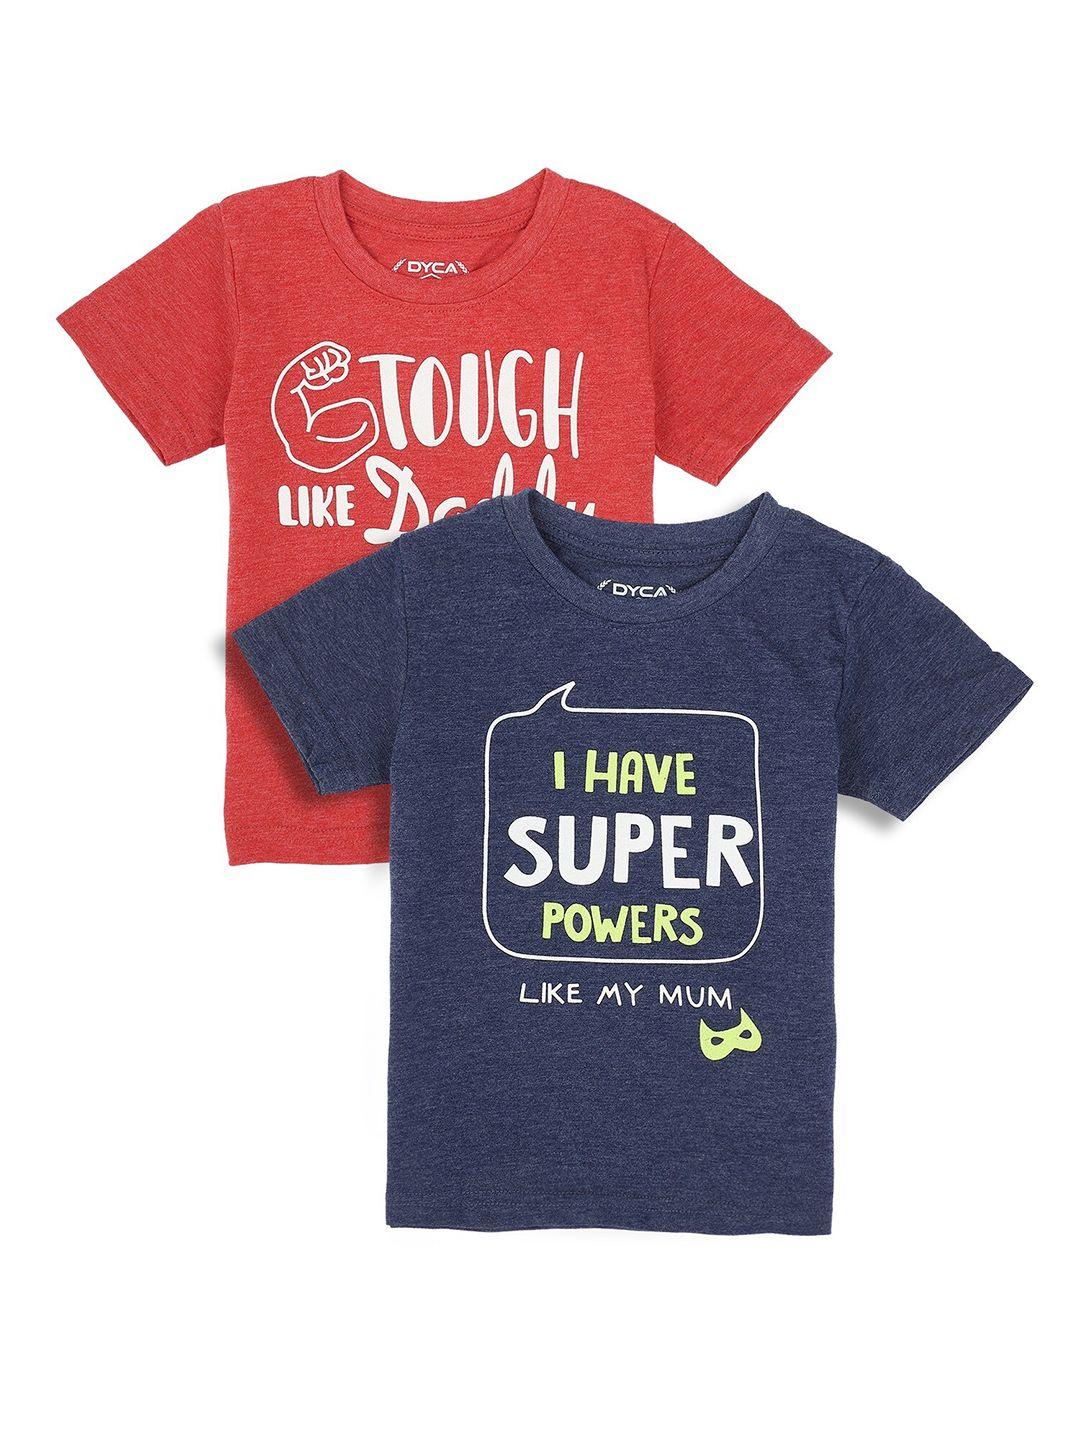 dyca boys pack of 2 navy blue & red printed cotton t-shirt